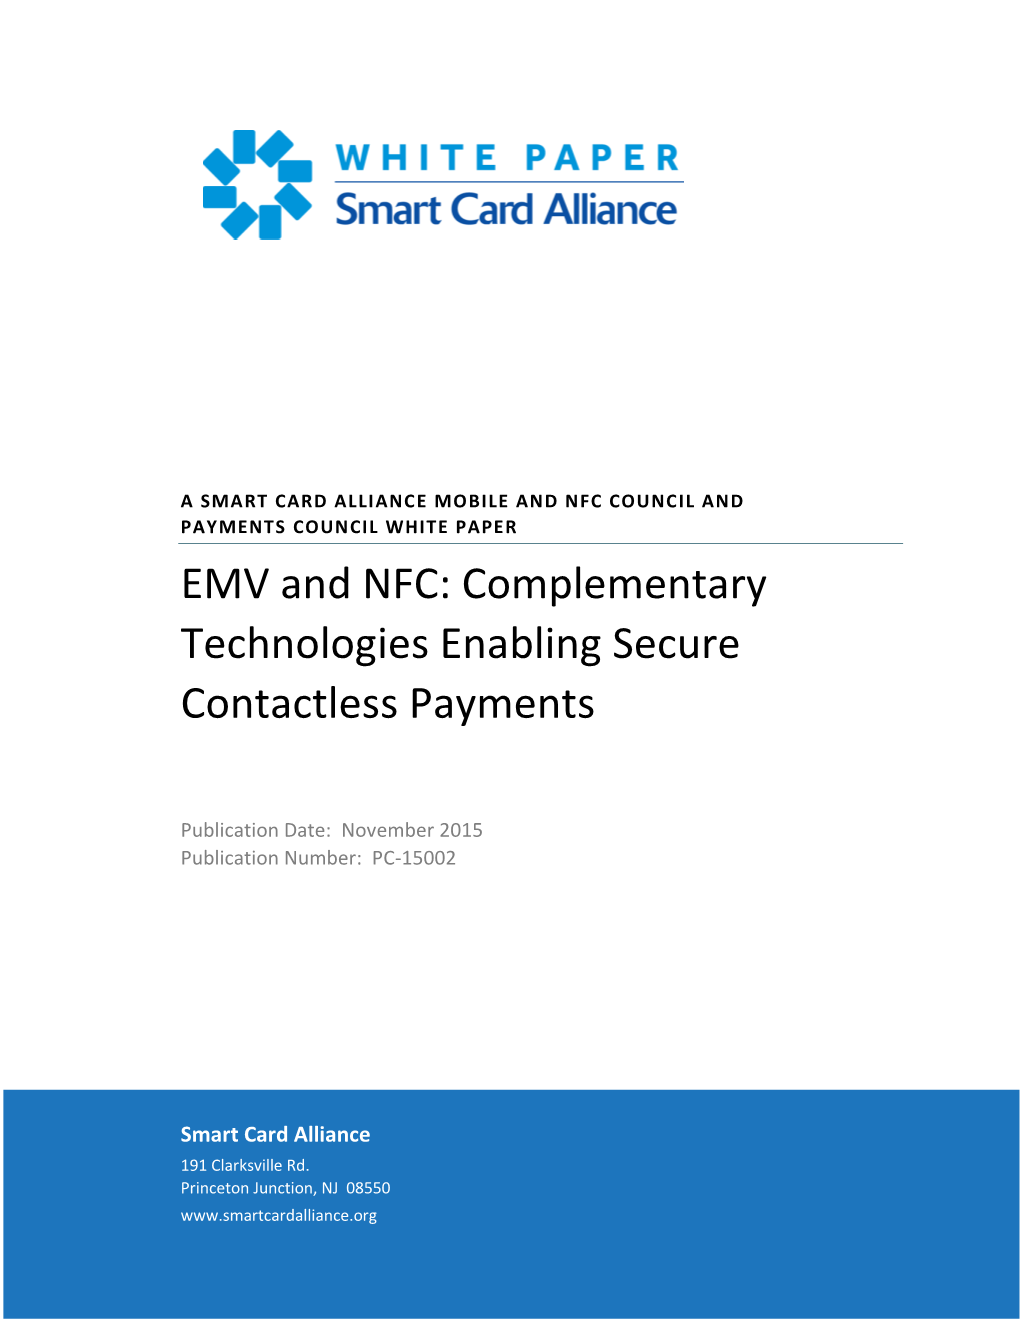 SMART CARD ALLIANCE MOBILE and NFC COUNCIL and PAYMENTS COUNCIL WHITE PAPER EMV and NFC: Complementary Technologies Enabling Secure